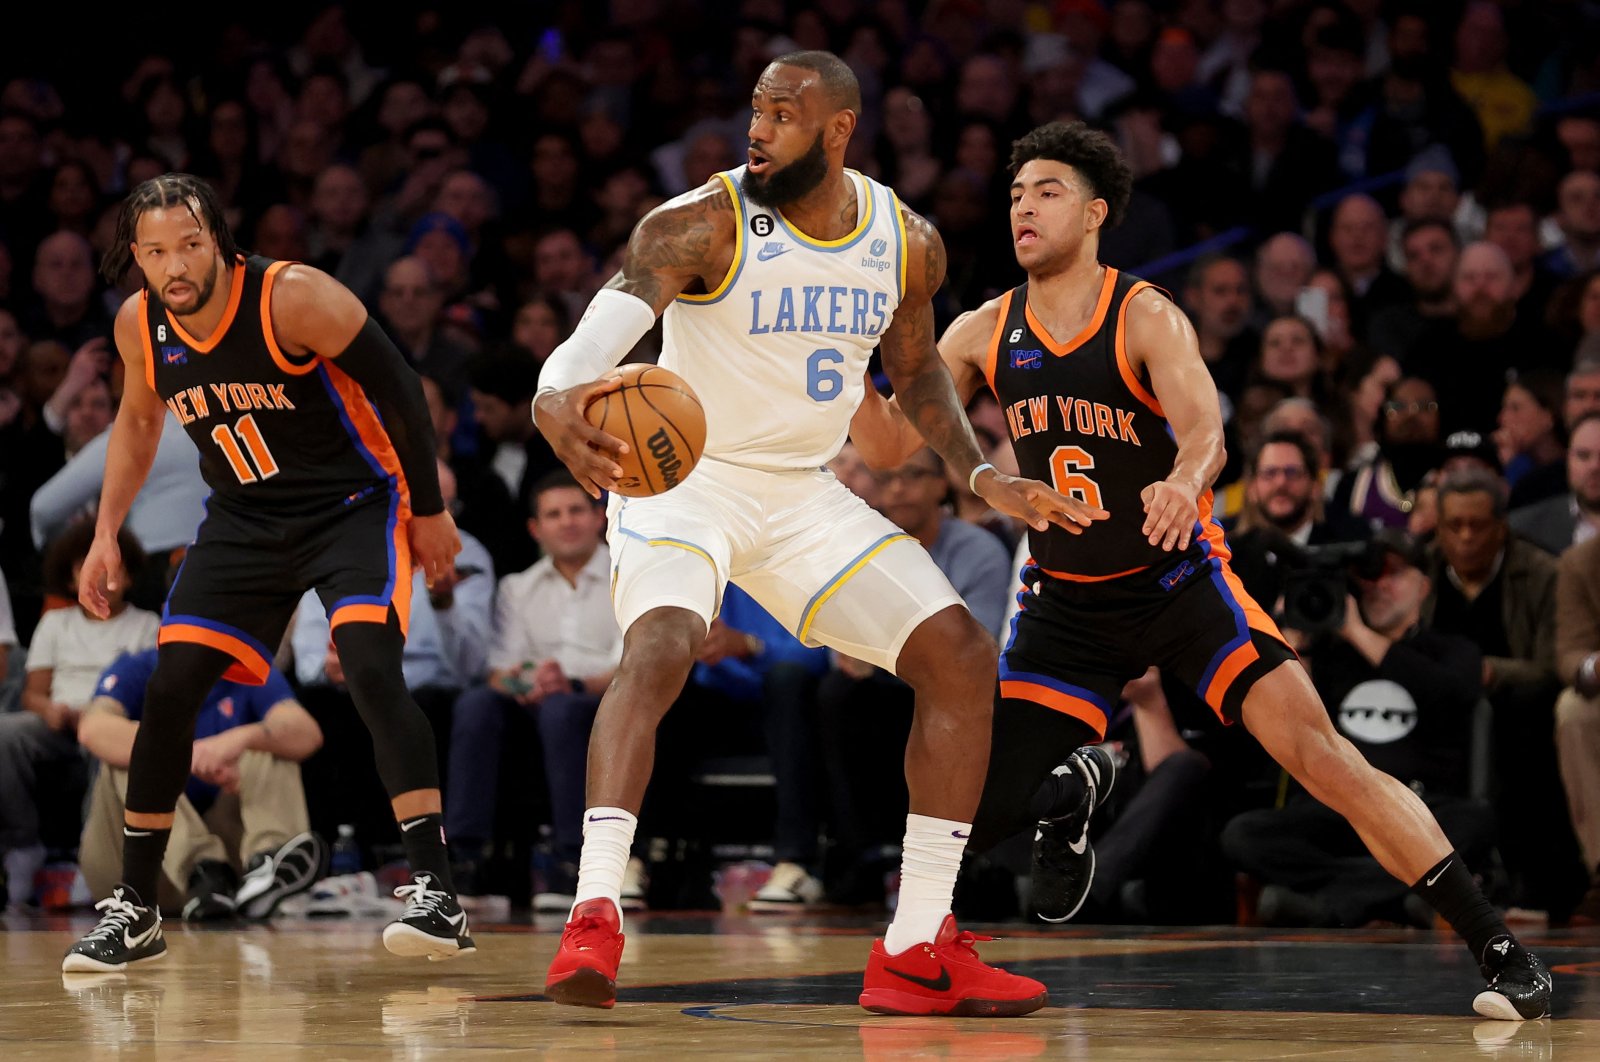 Los Angeles Lakers forward LeBron James (C) controls the ball against New York Knicks guards Quentin Grimes (R) and Jalen Brunson (L) during the first quarter at Madison Square Garden. New York, US., Jan 31, 2023. (Reuters Photo)